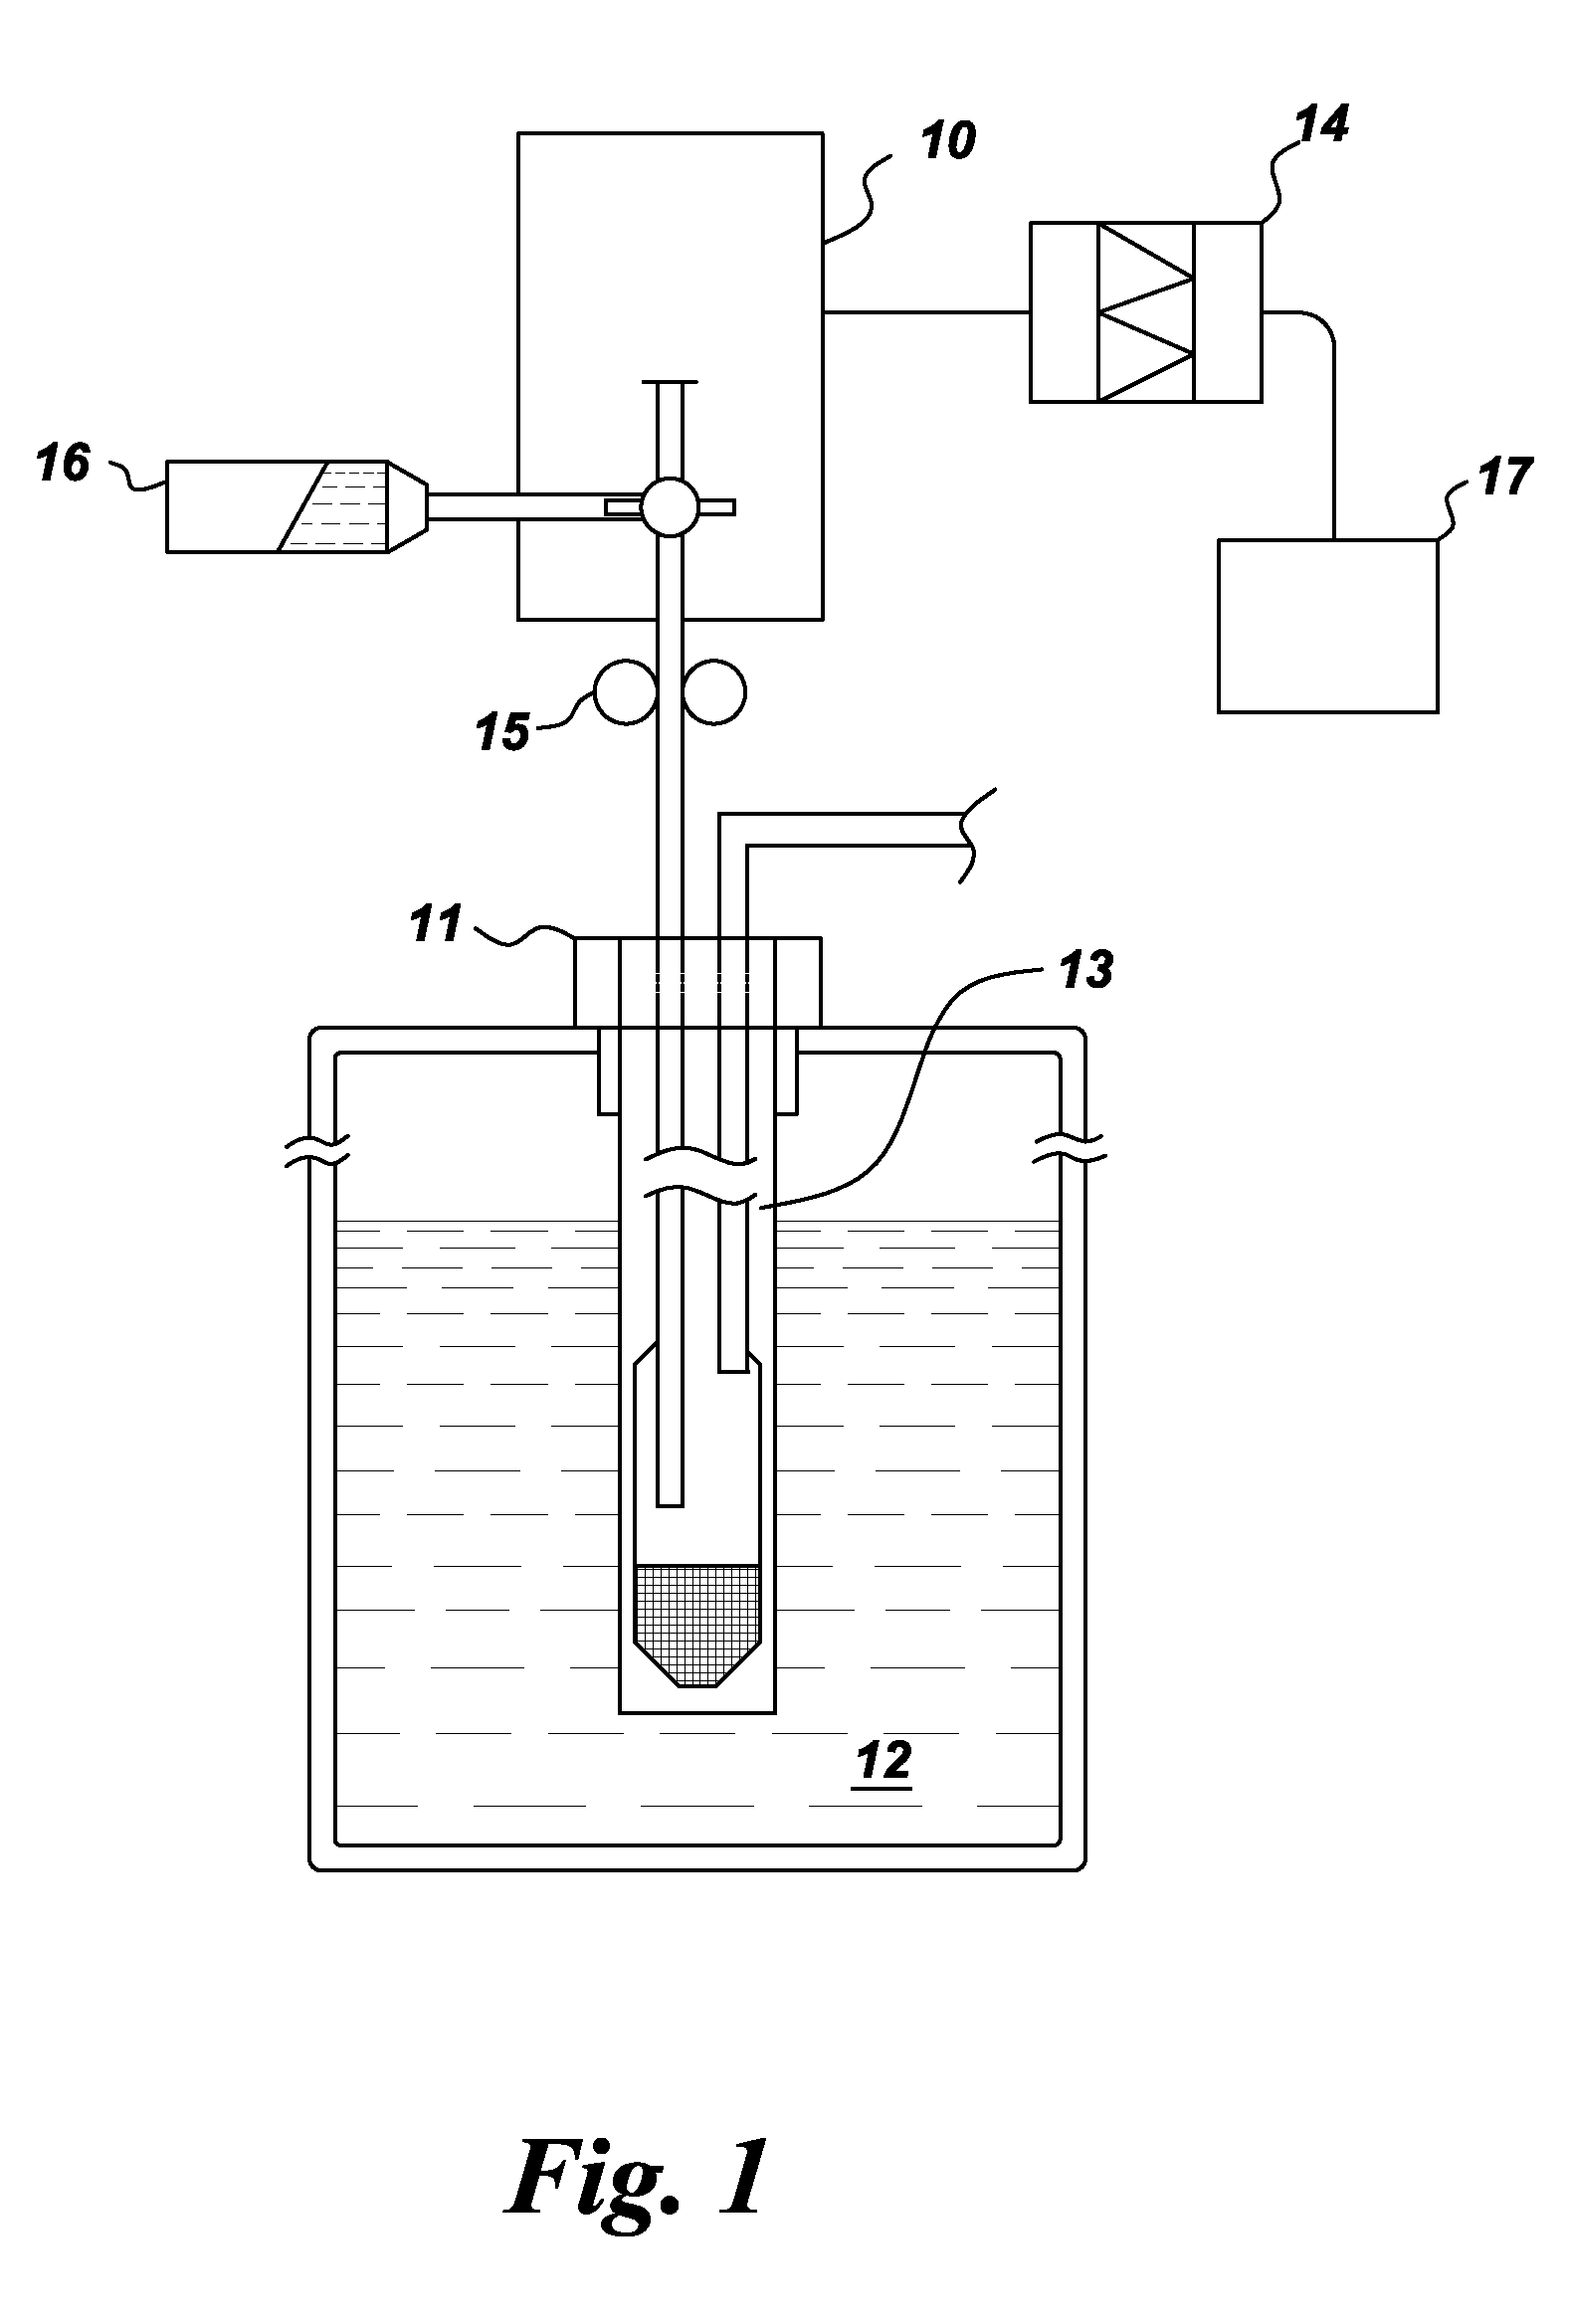 Apparatus and method for a fully automated preparation of a hyperpolarizing imaging agent